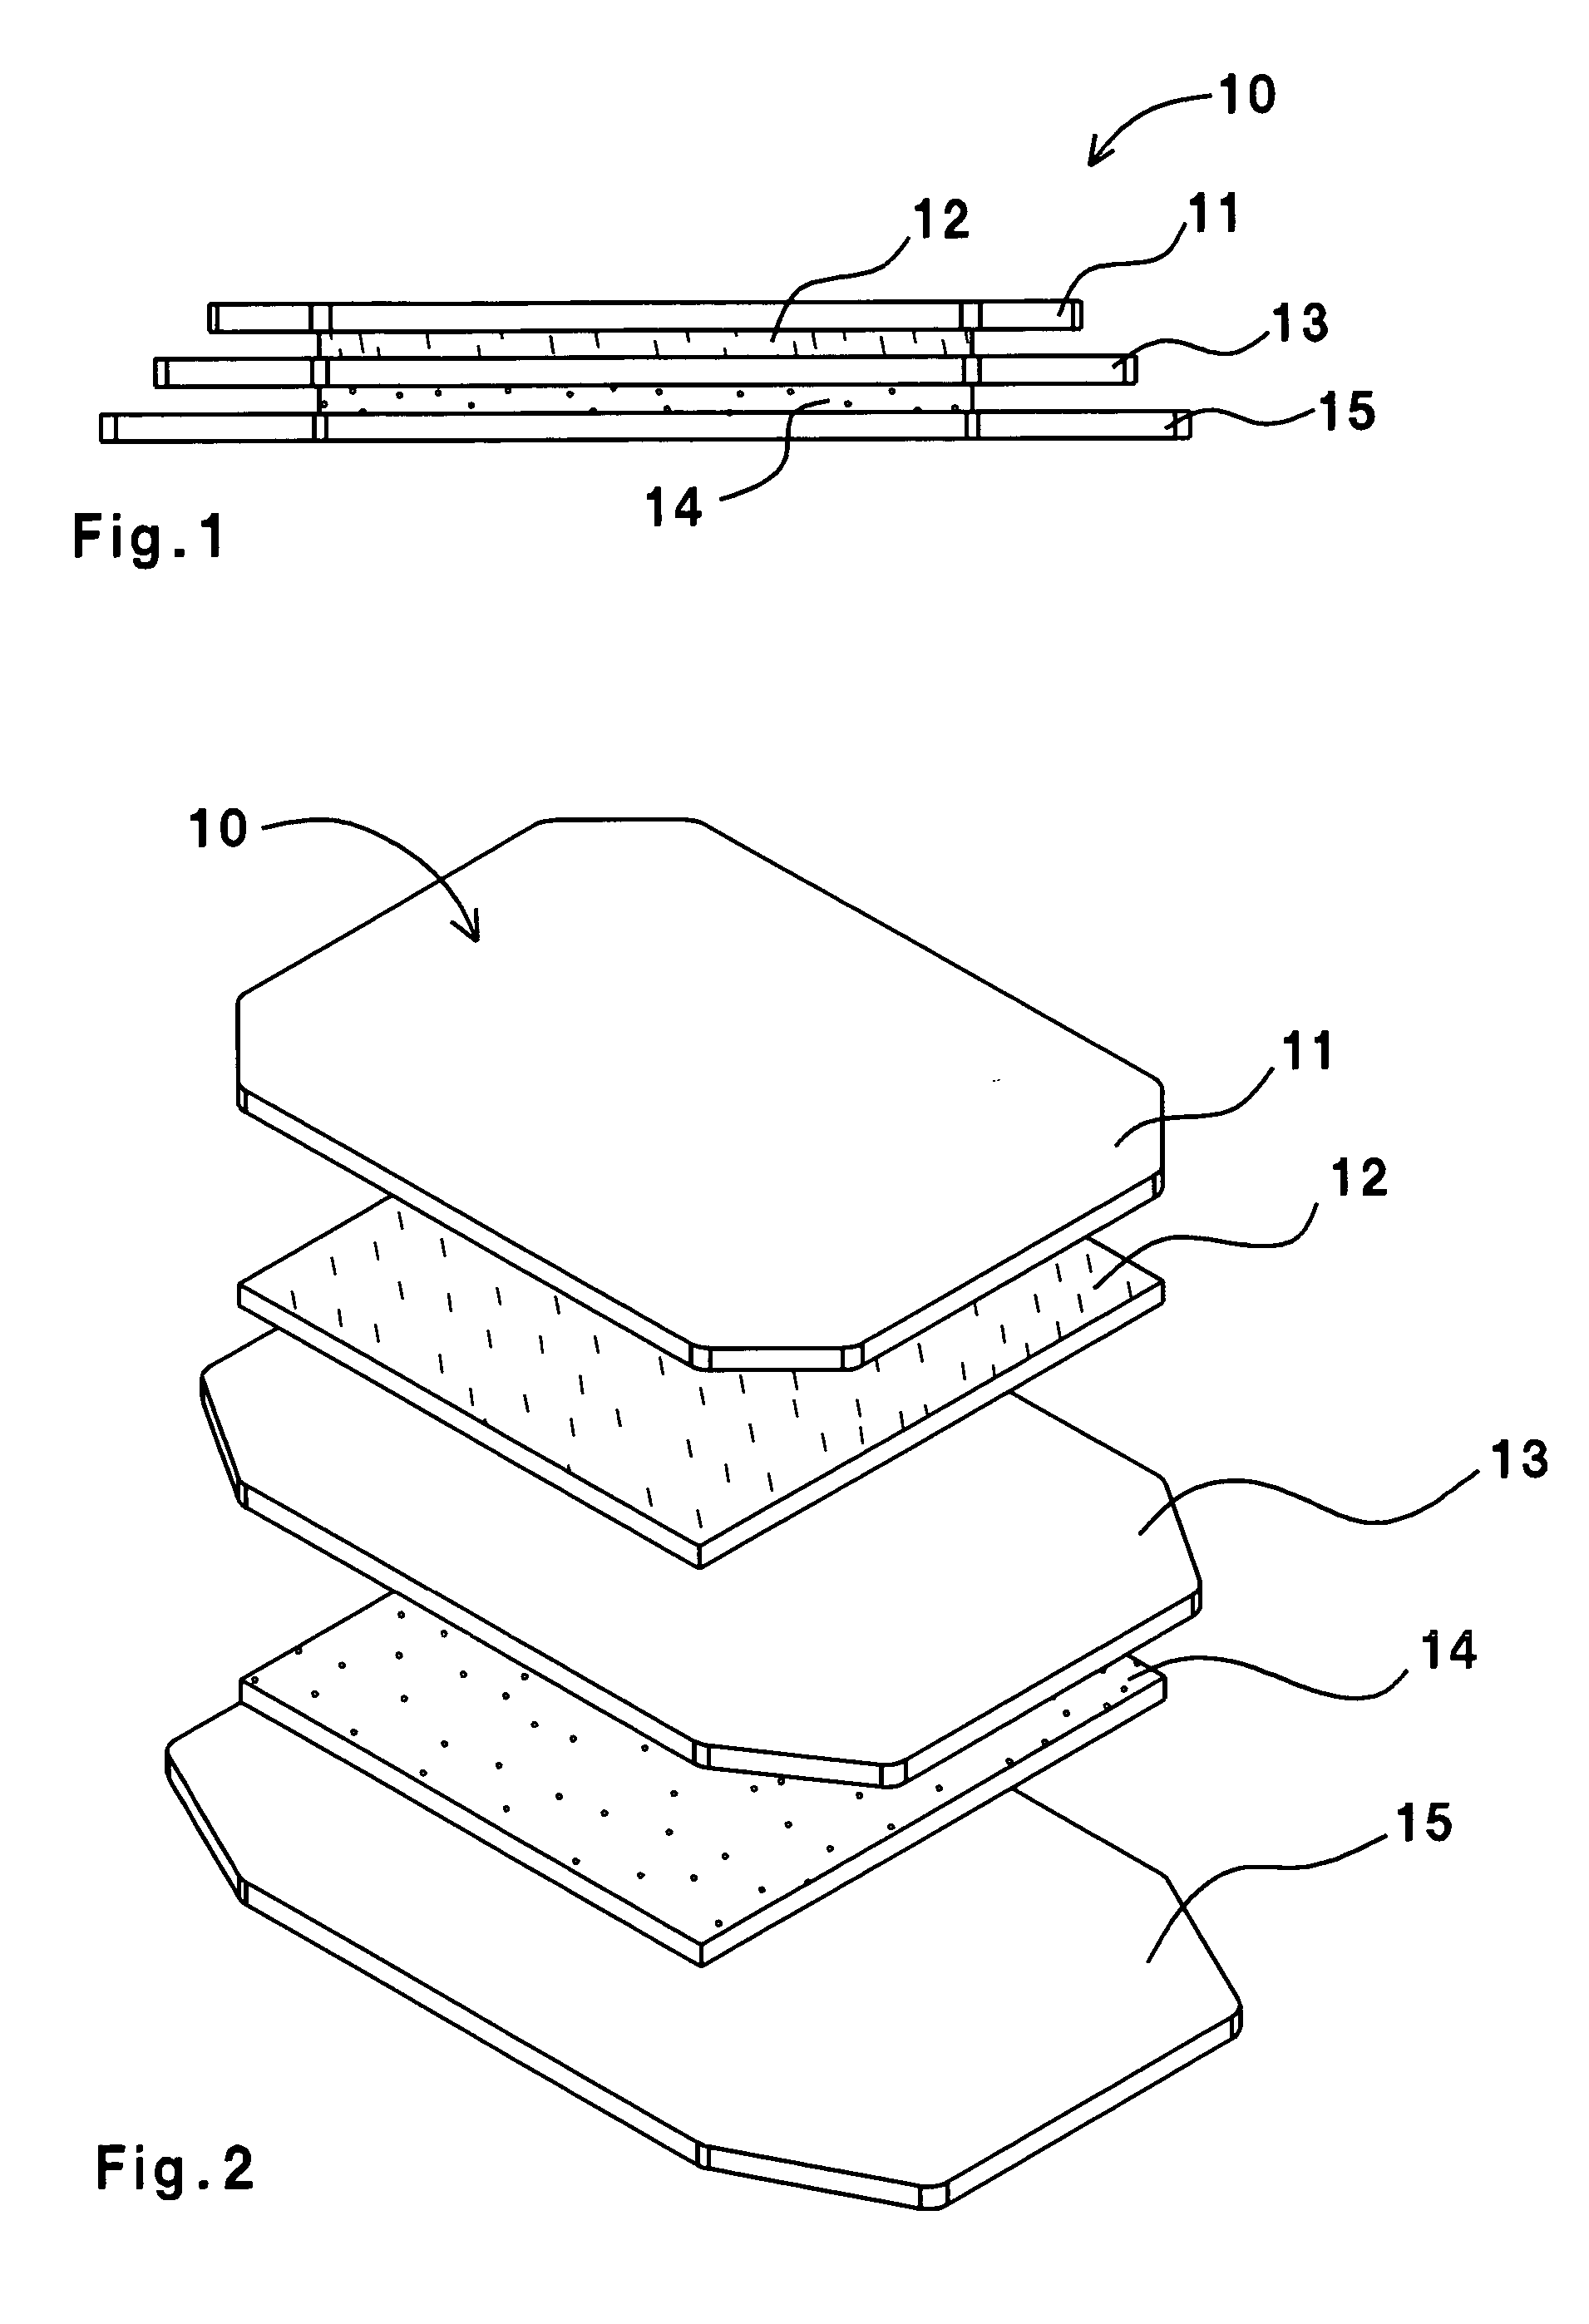 Disposable medical article with multiple adhesives for skin attachment